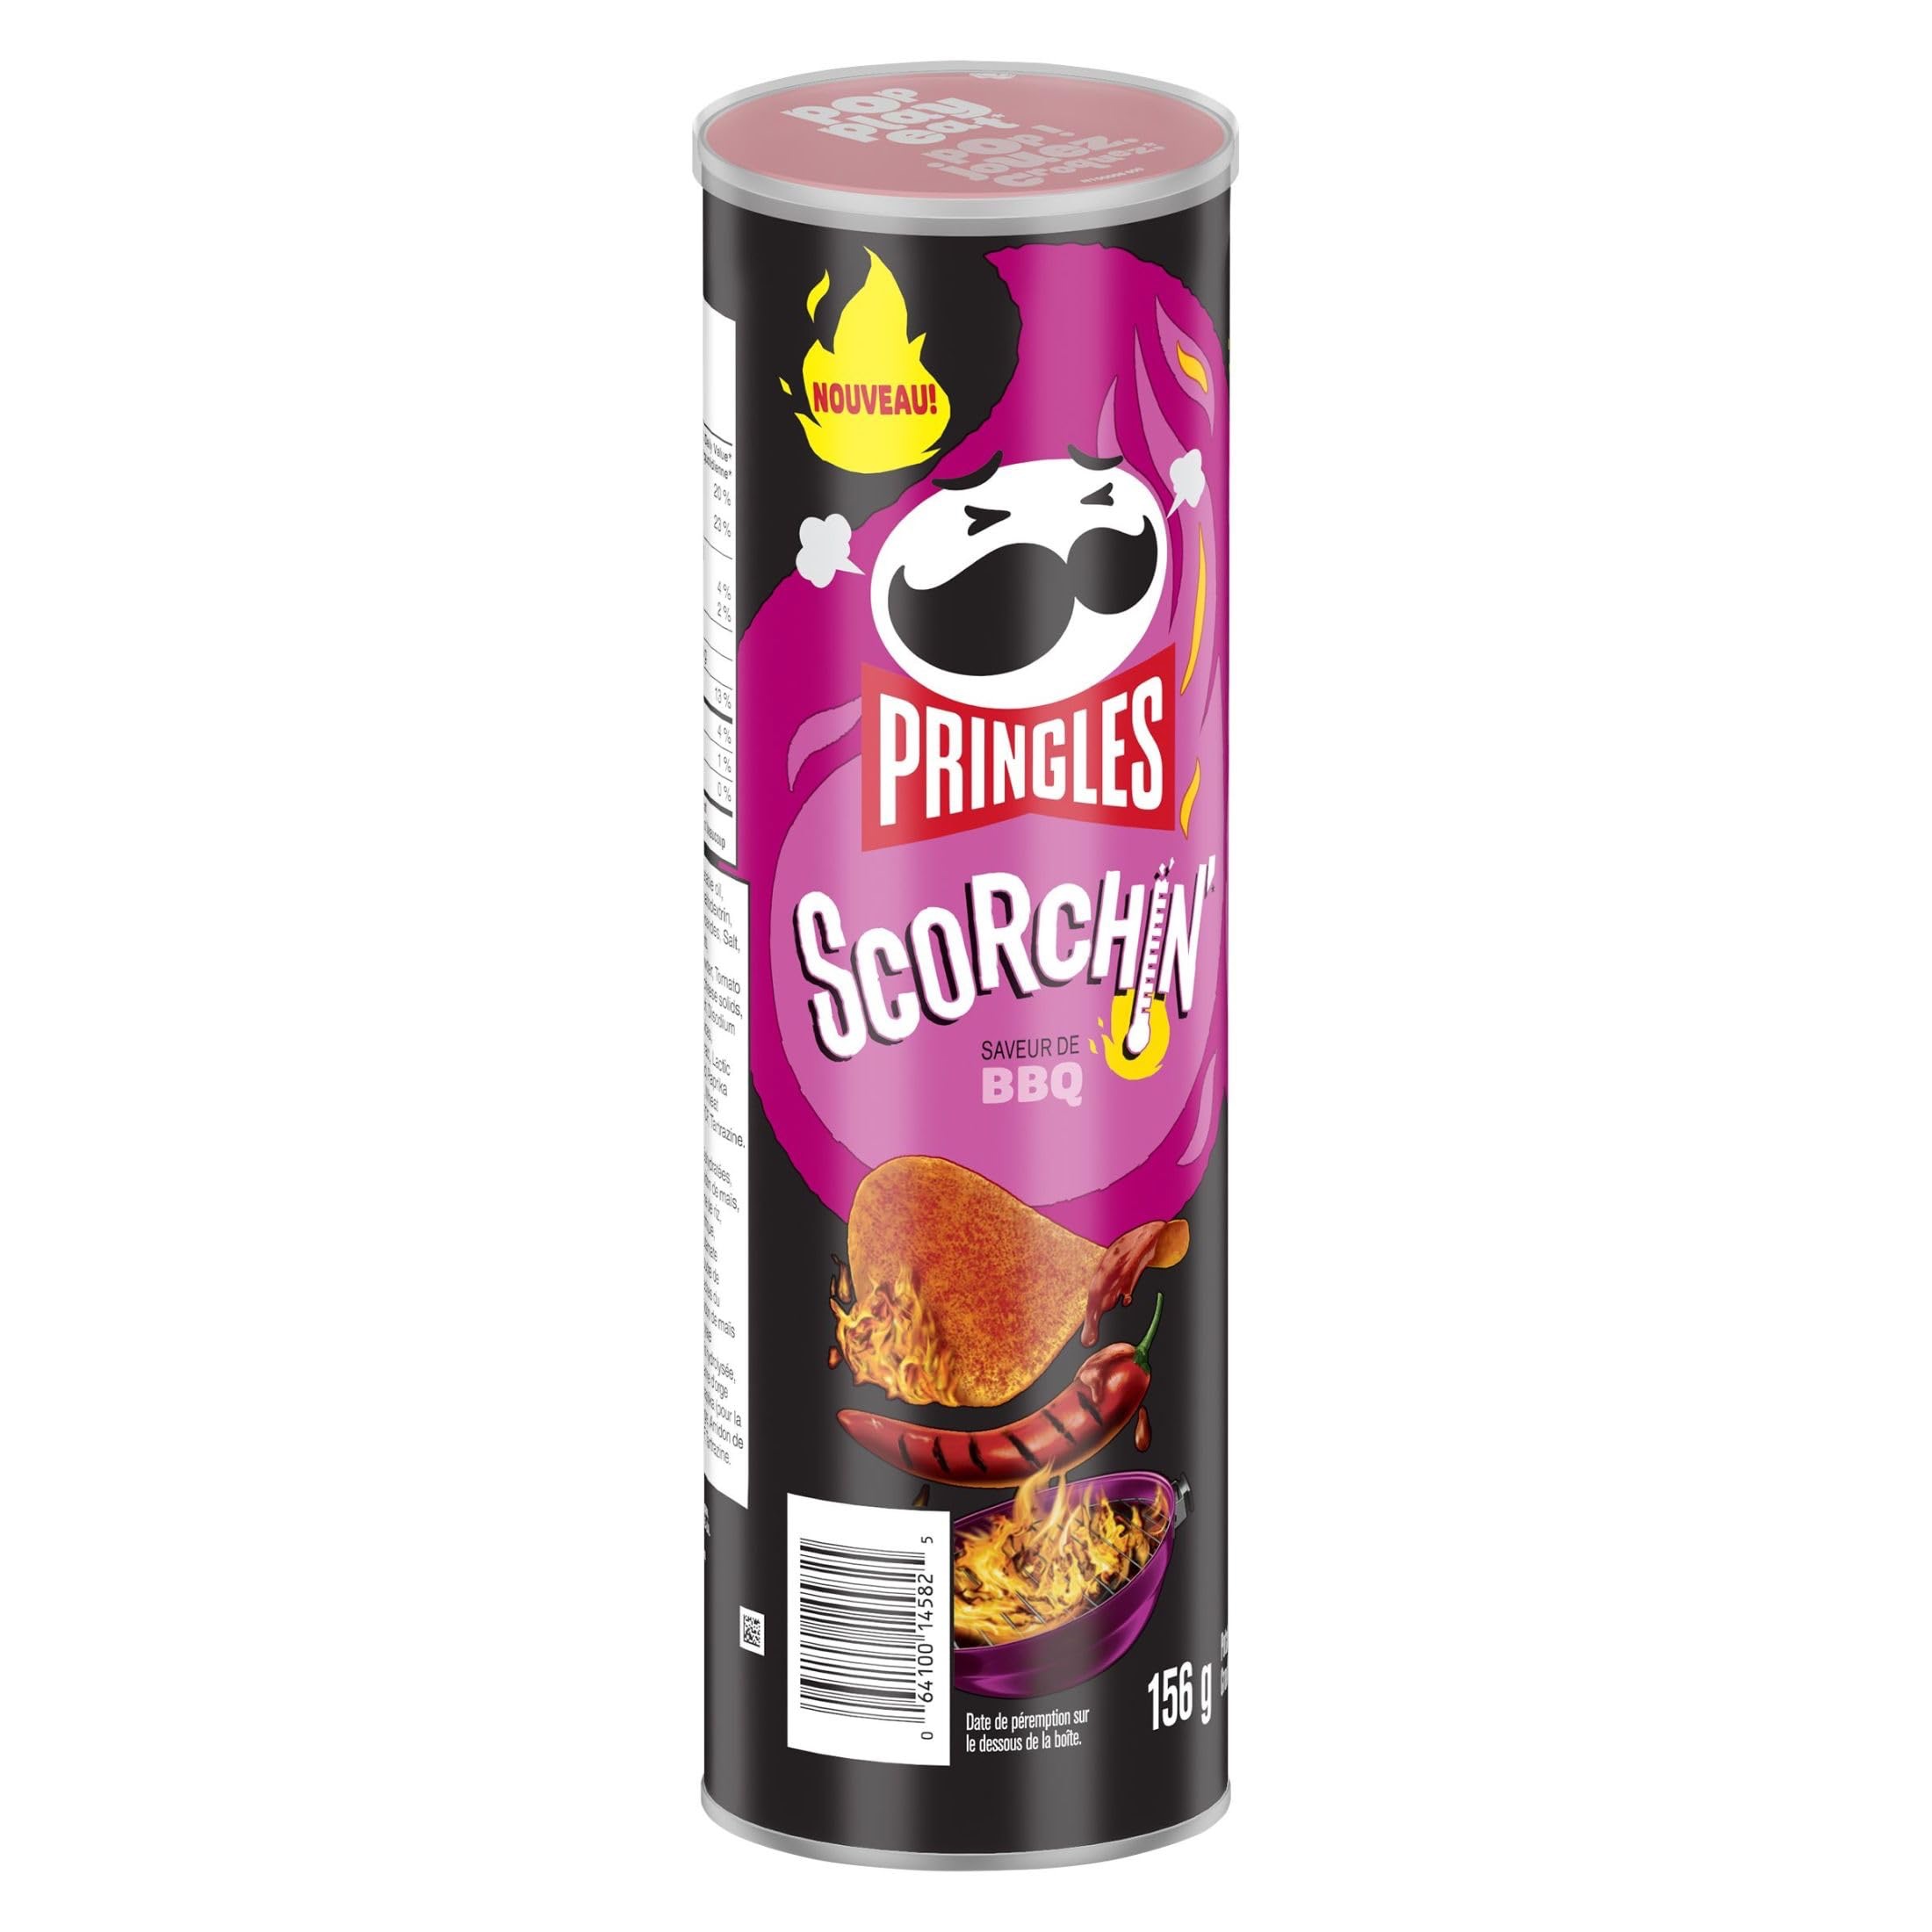 Pringles* Scorchin’* BBQ Flavour Potato Chips 156 g : Amazon.ca: Grocery & Gourmet Food